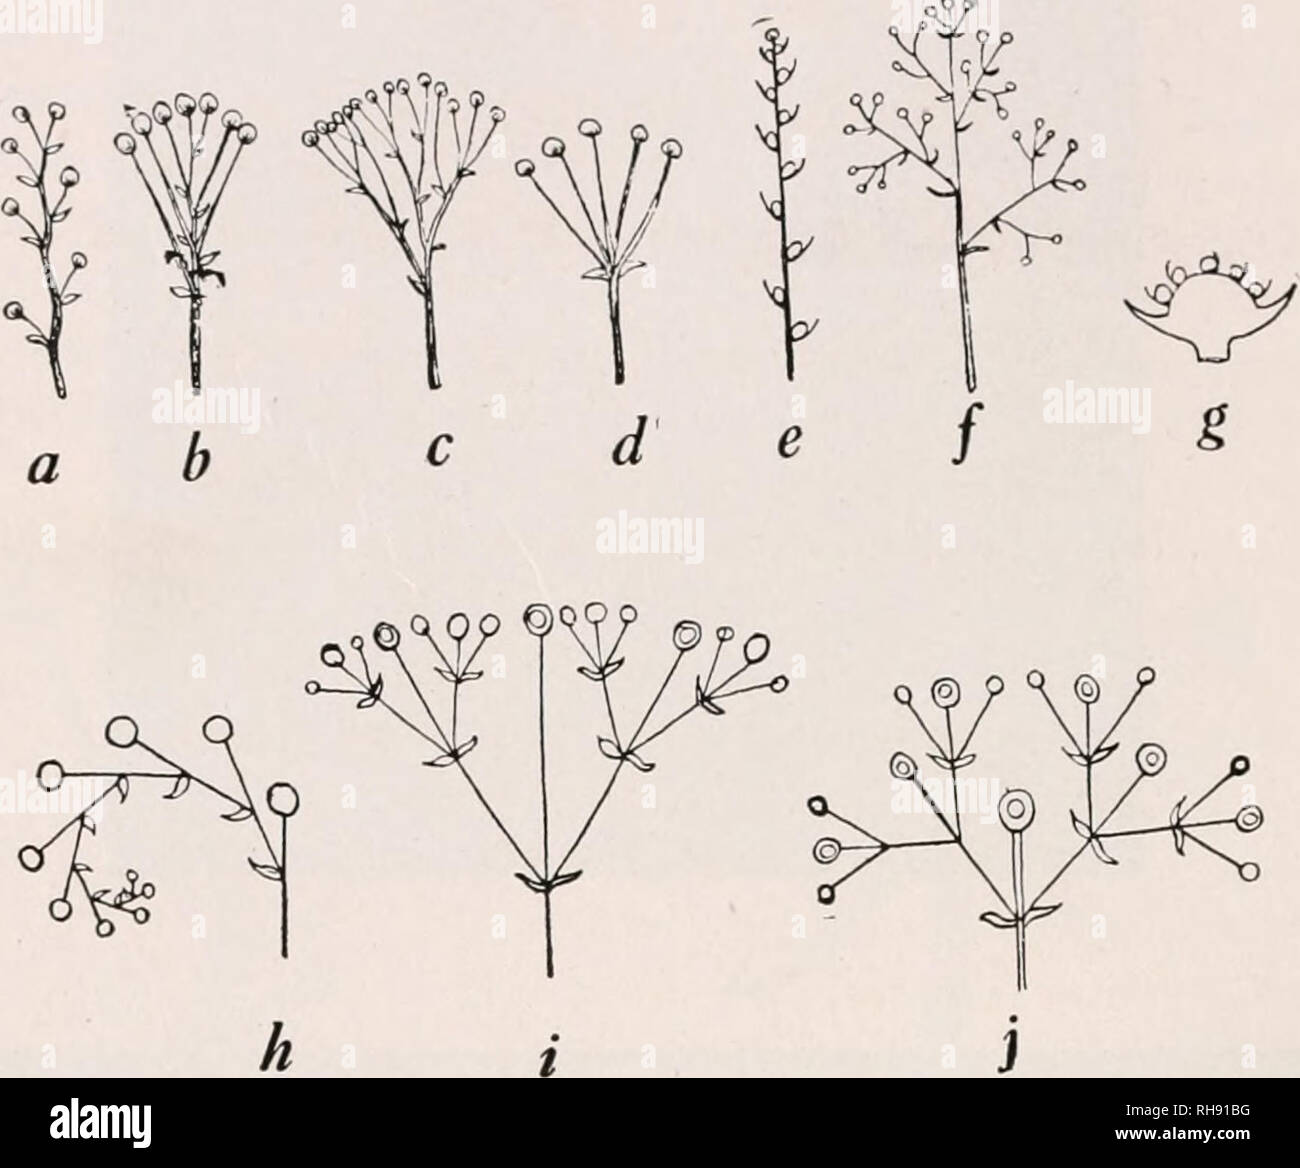 . Botany for agricultural students. Plants. 32 FLOWERS In complex flower clusters coinbinations of the simpler types of clusters often occur together. Thus, in the thyrse, the complex cluster which is typical of the Lilac and Horse-Chestnut, and, in. Fig. 34. — Upper diagrams show types of indeterminate inflorescences. a, raceme; b, corymb; c, compomid corymb; d, mnbel; e, spike; /, panicle; g, head. Lower diagrams show types of determinate inflorescences; h, cyme half developed (scorpioid); i, flat-topped or corymbose cyme; j, typical cyme. the panicle of the Grasses, the characteristics of b Stock Photo